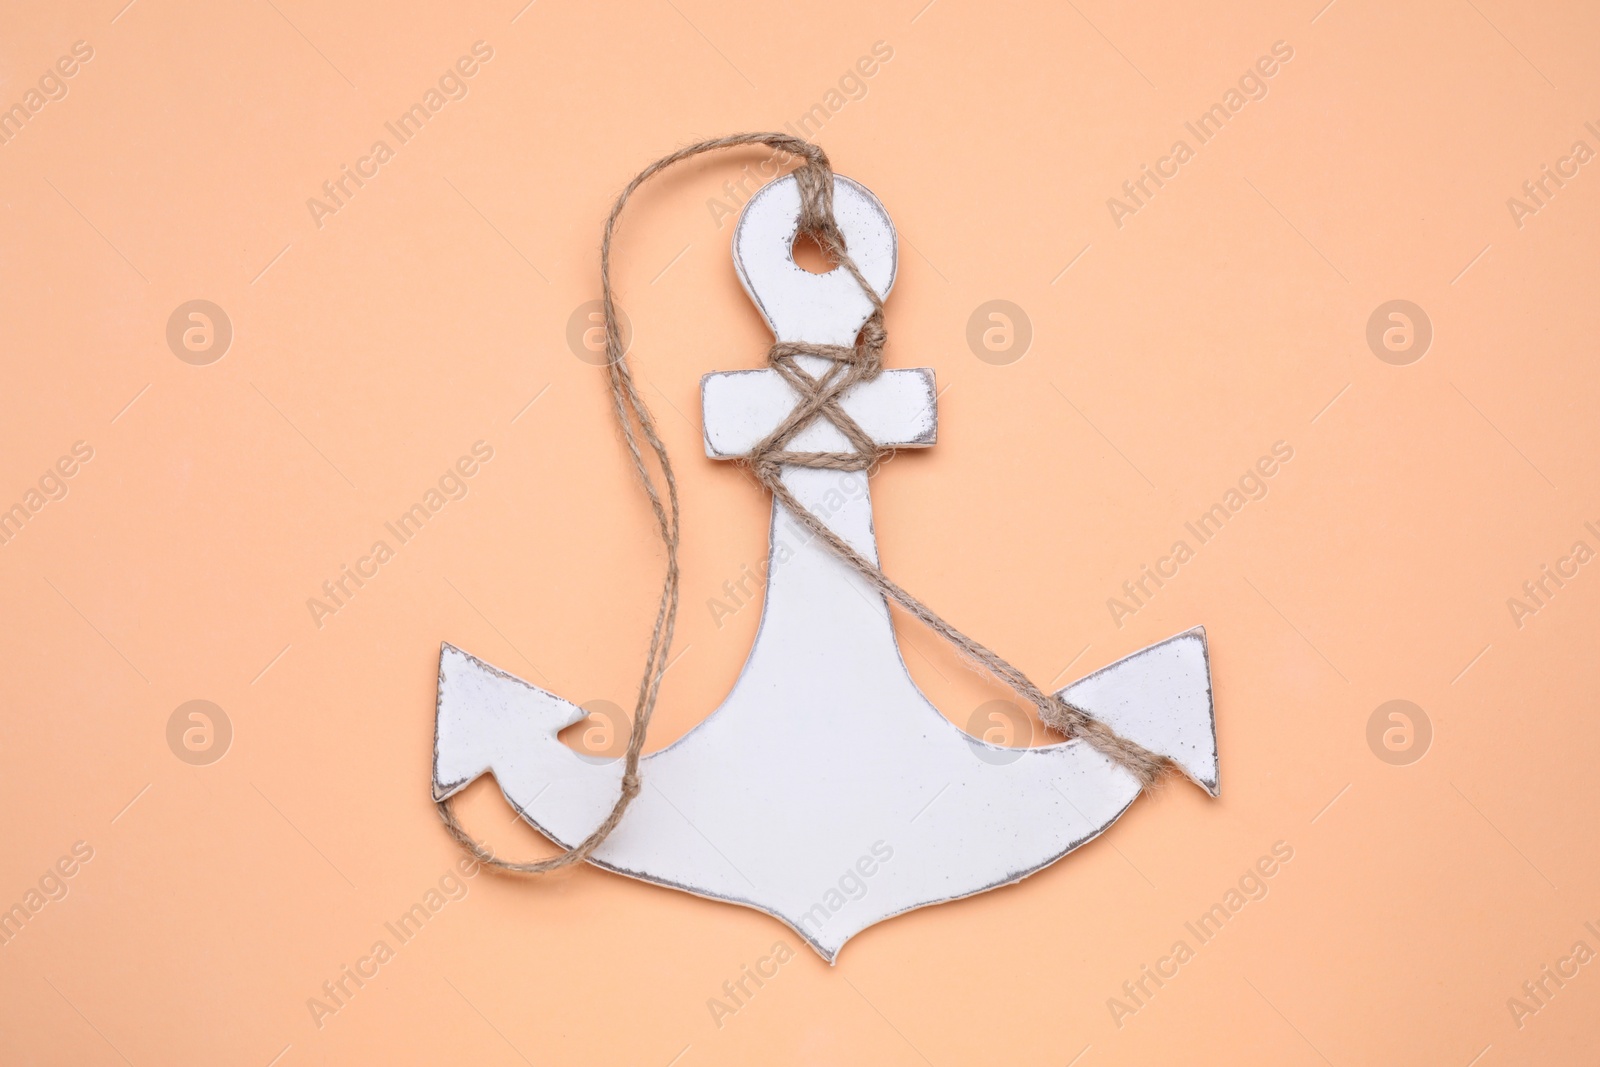 Photo of White wooden anchor figure on pale orange background, top view